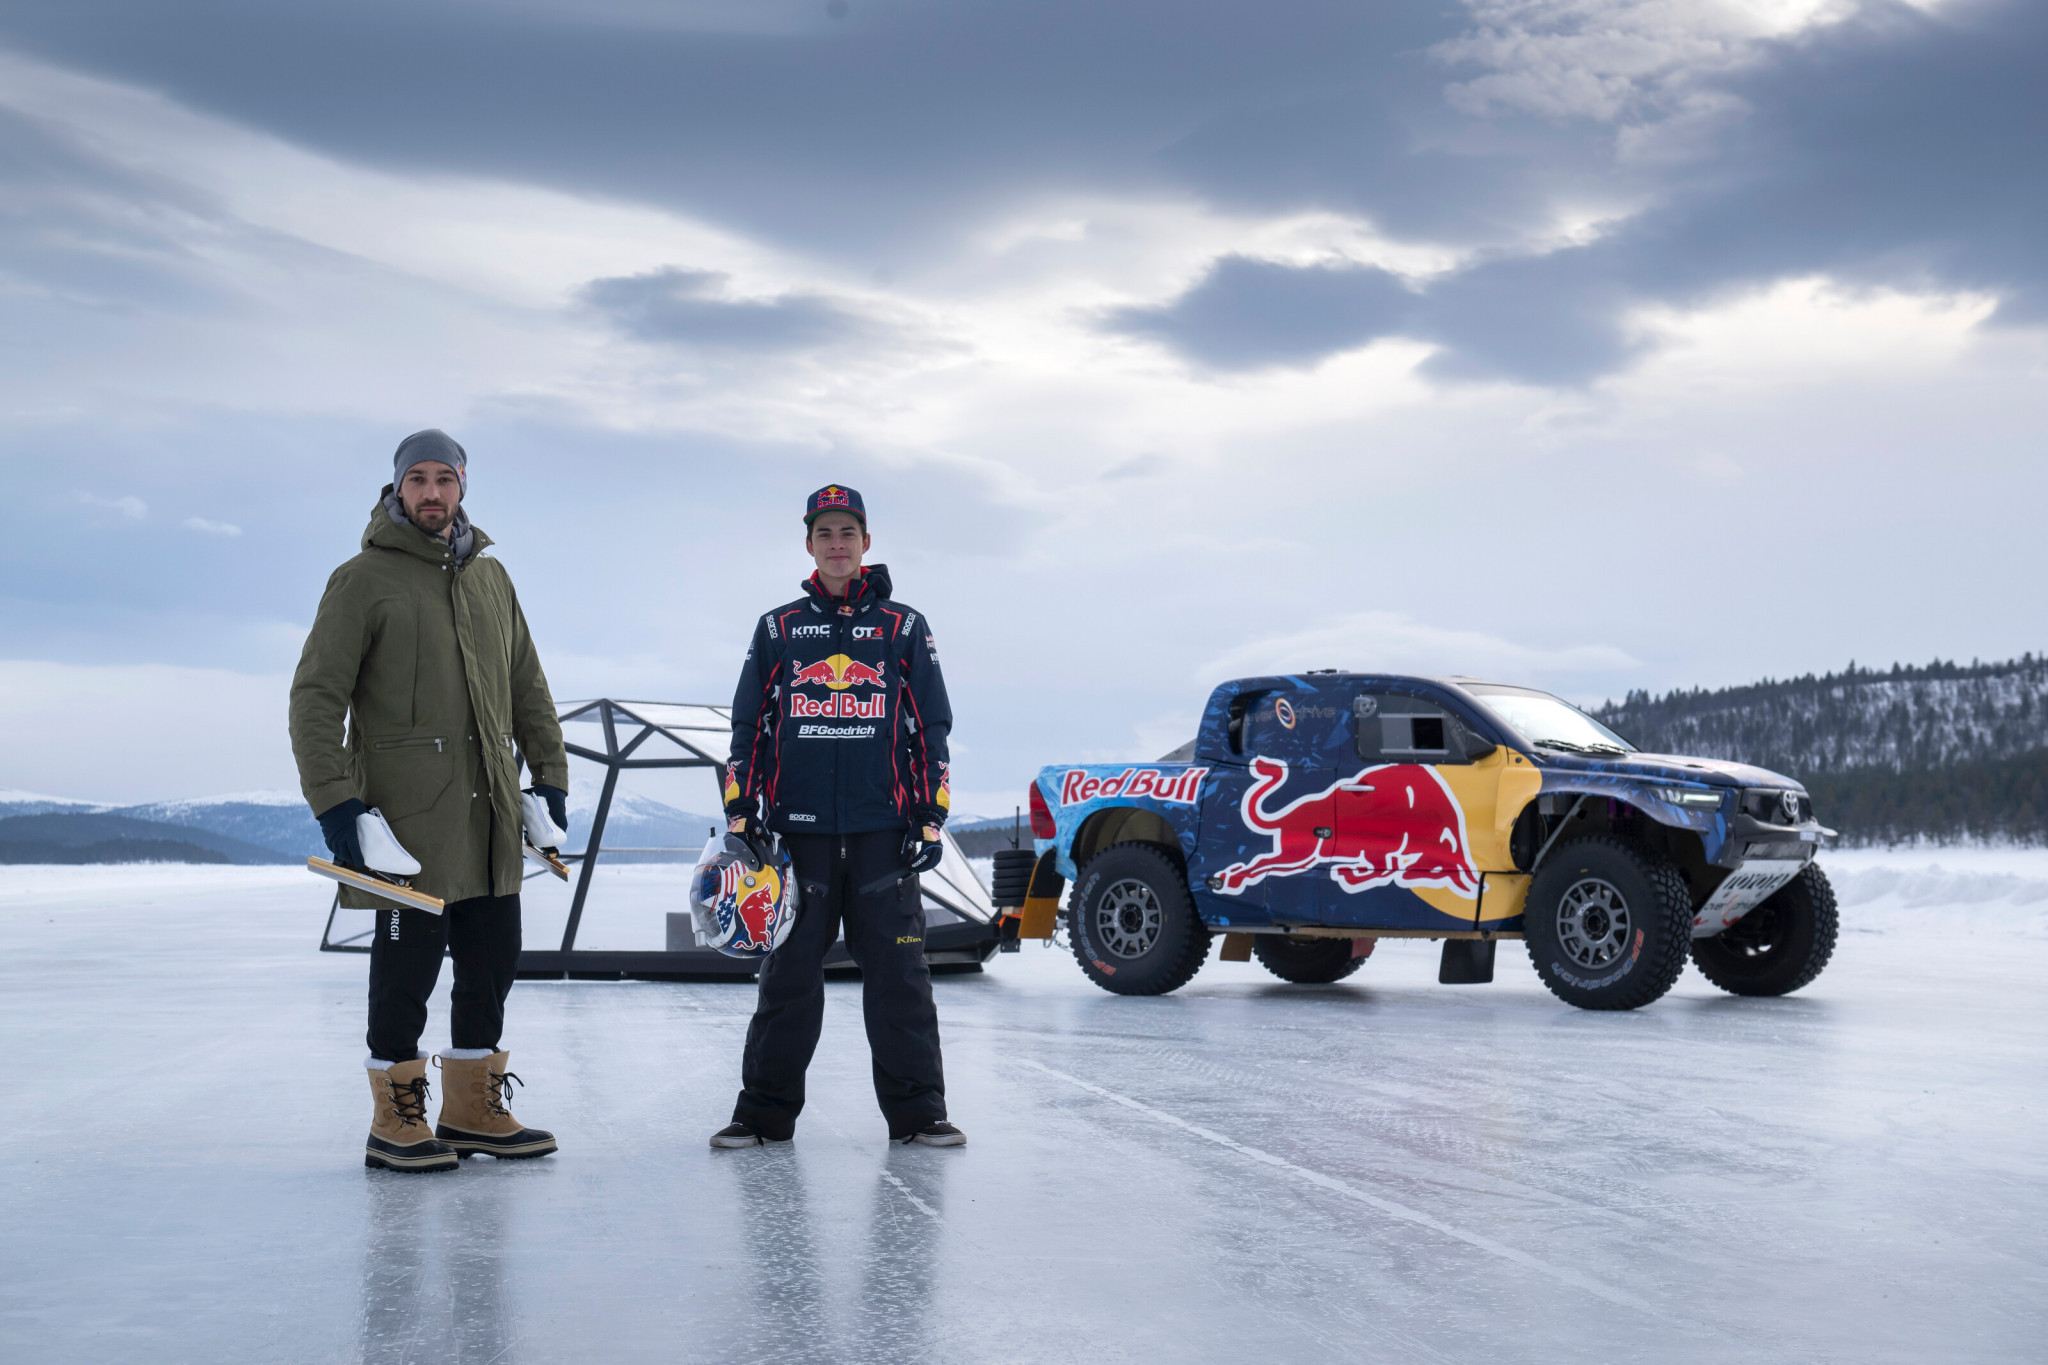  
The large shield was pulled by a equipped Dakar Rally truck driven by the young rally racer Seth Quintero ©Red Bull
